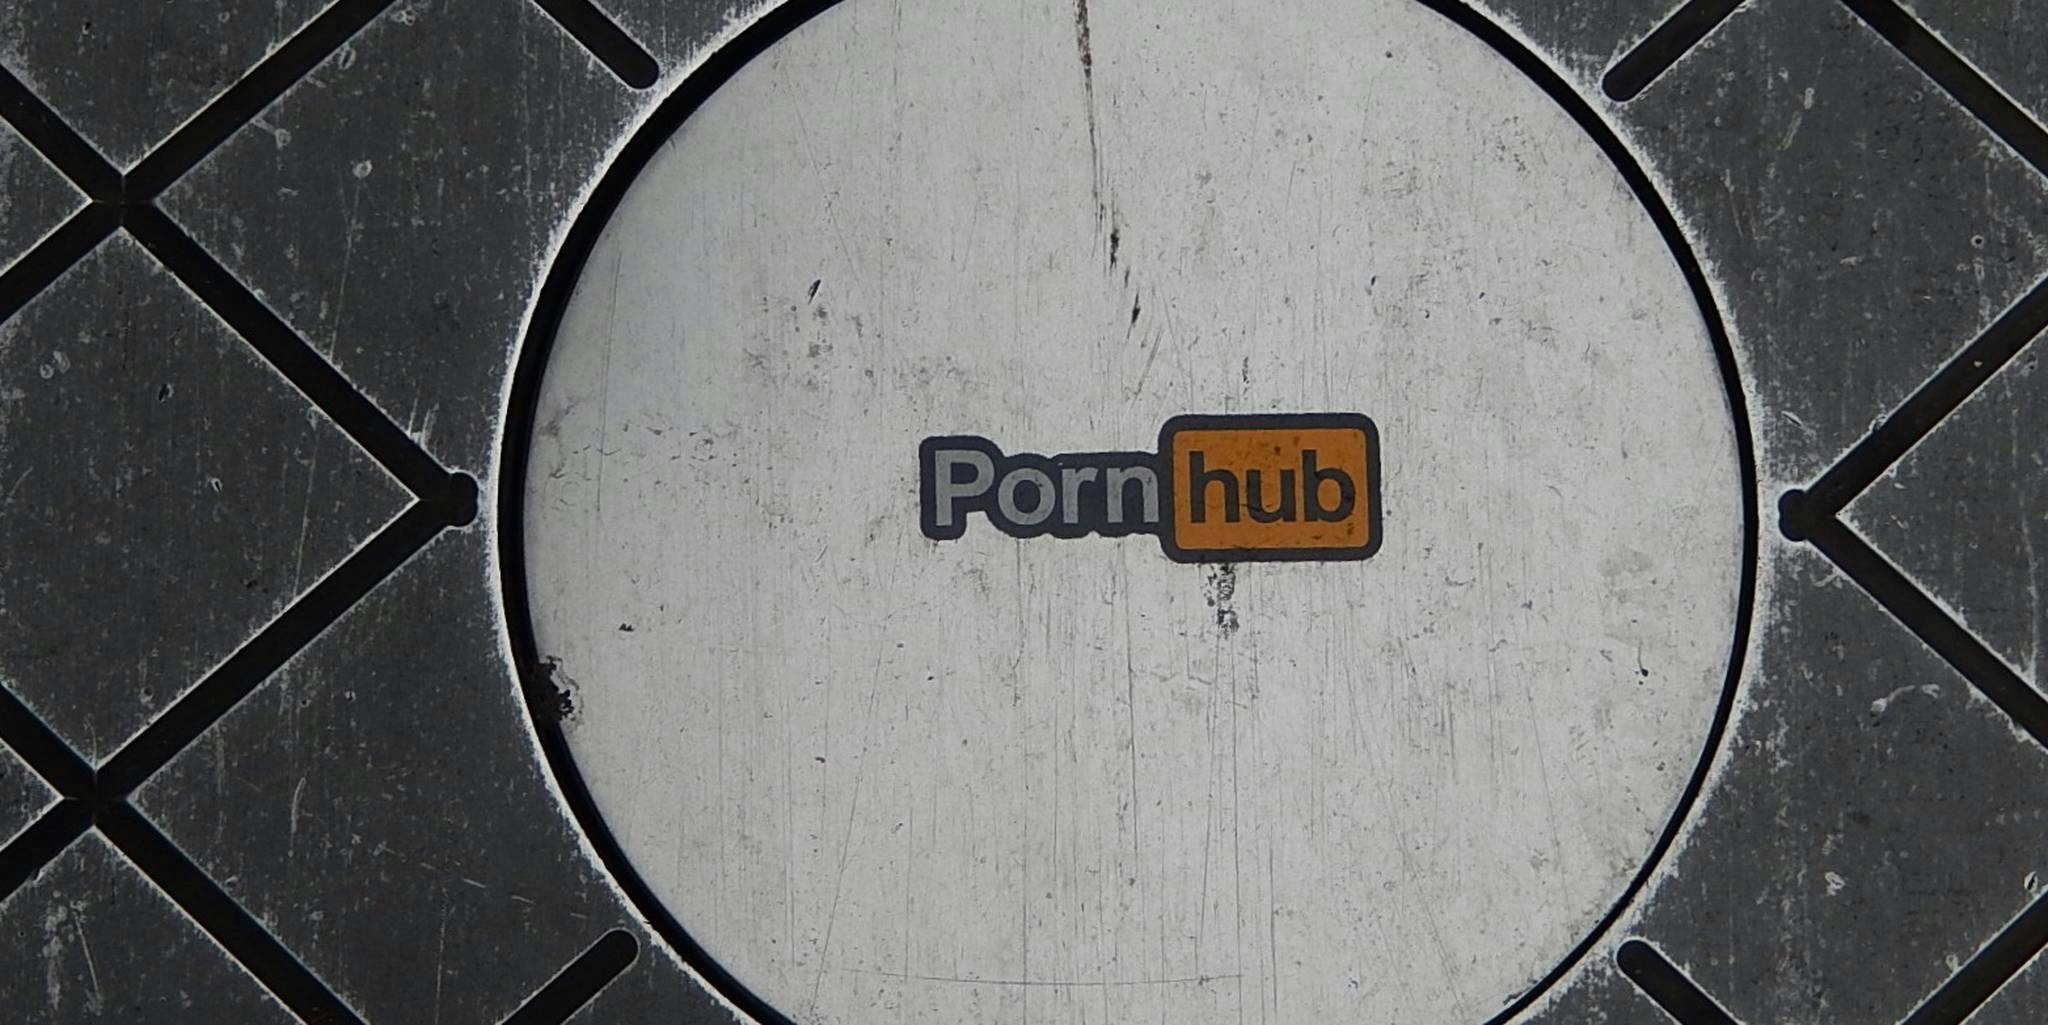 Hacker claims to have breached Pornhub, but Pornhub says it’s a hoax